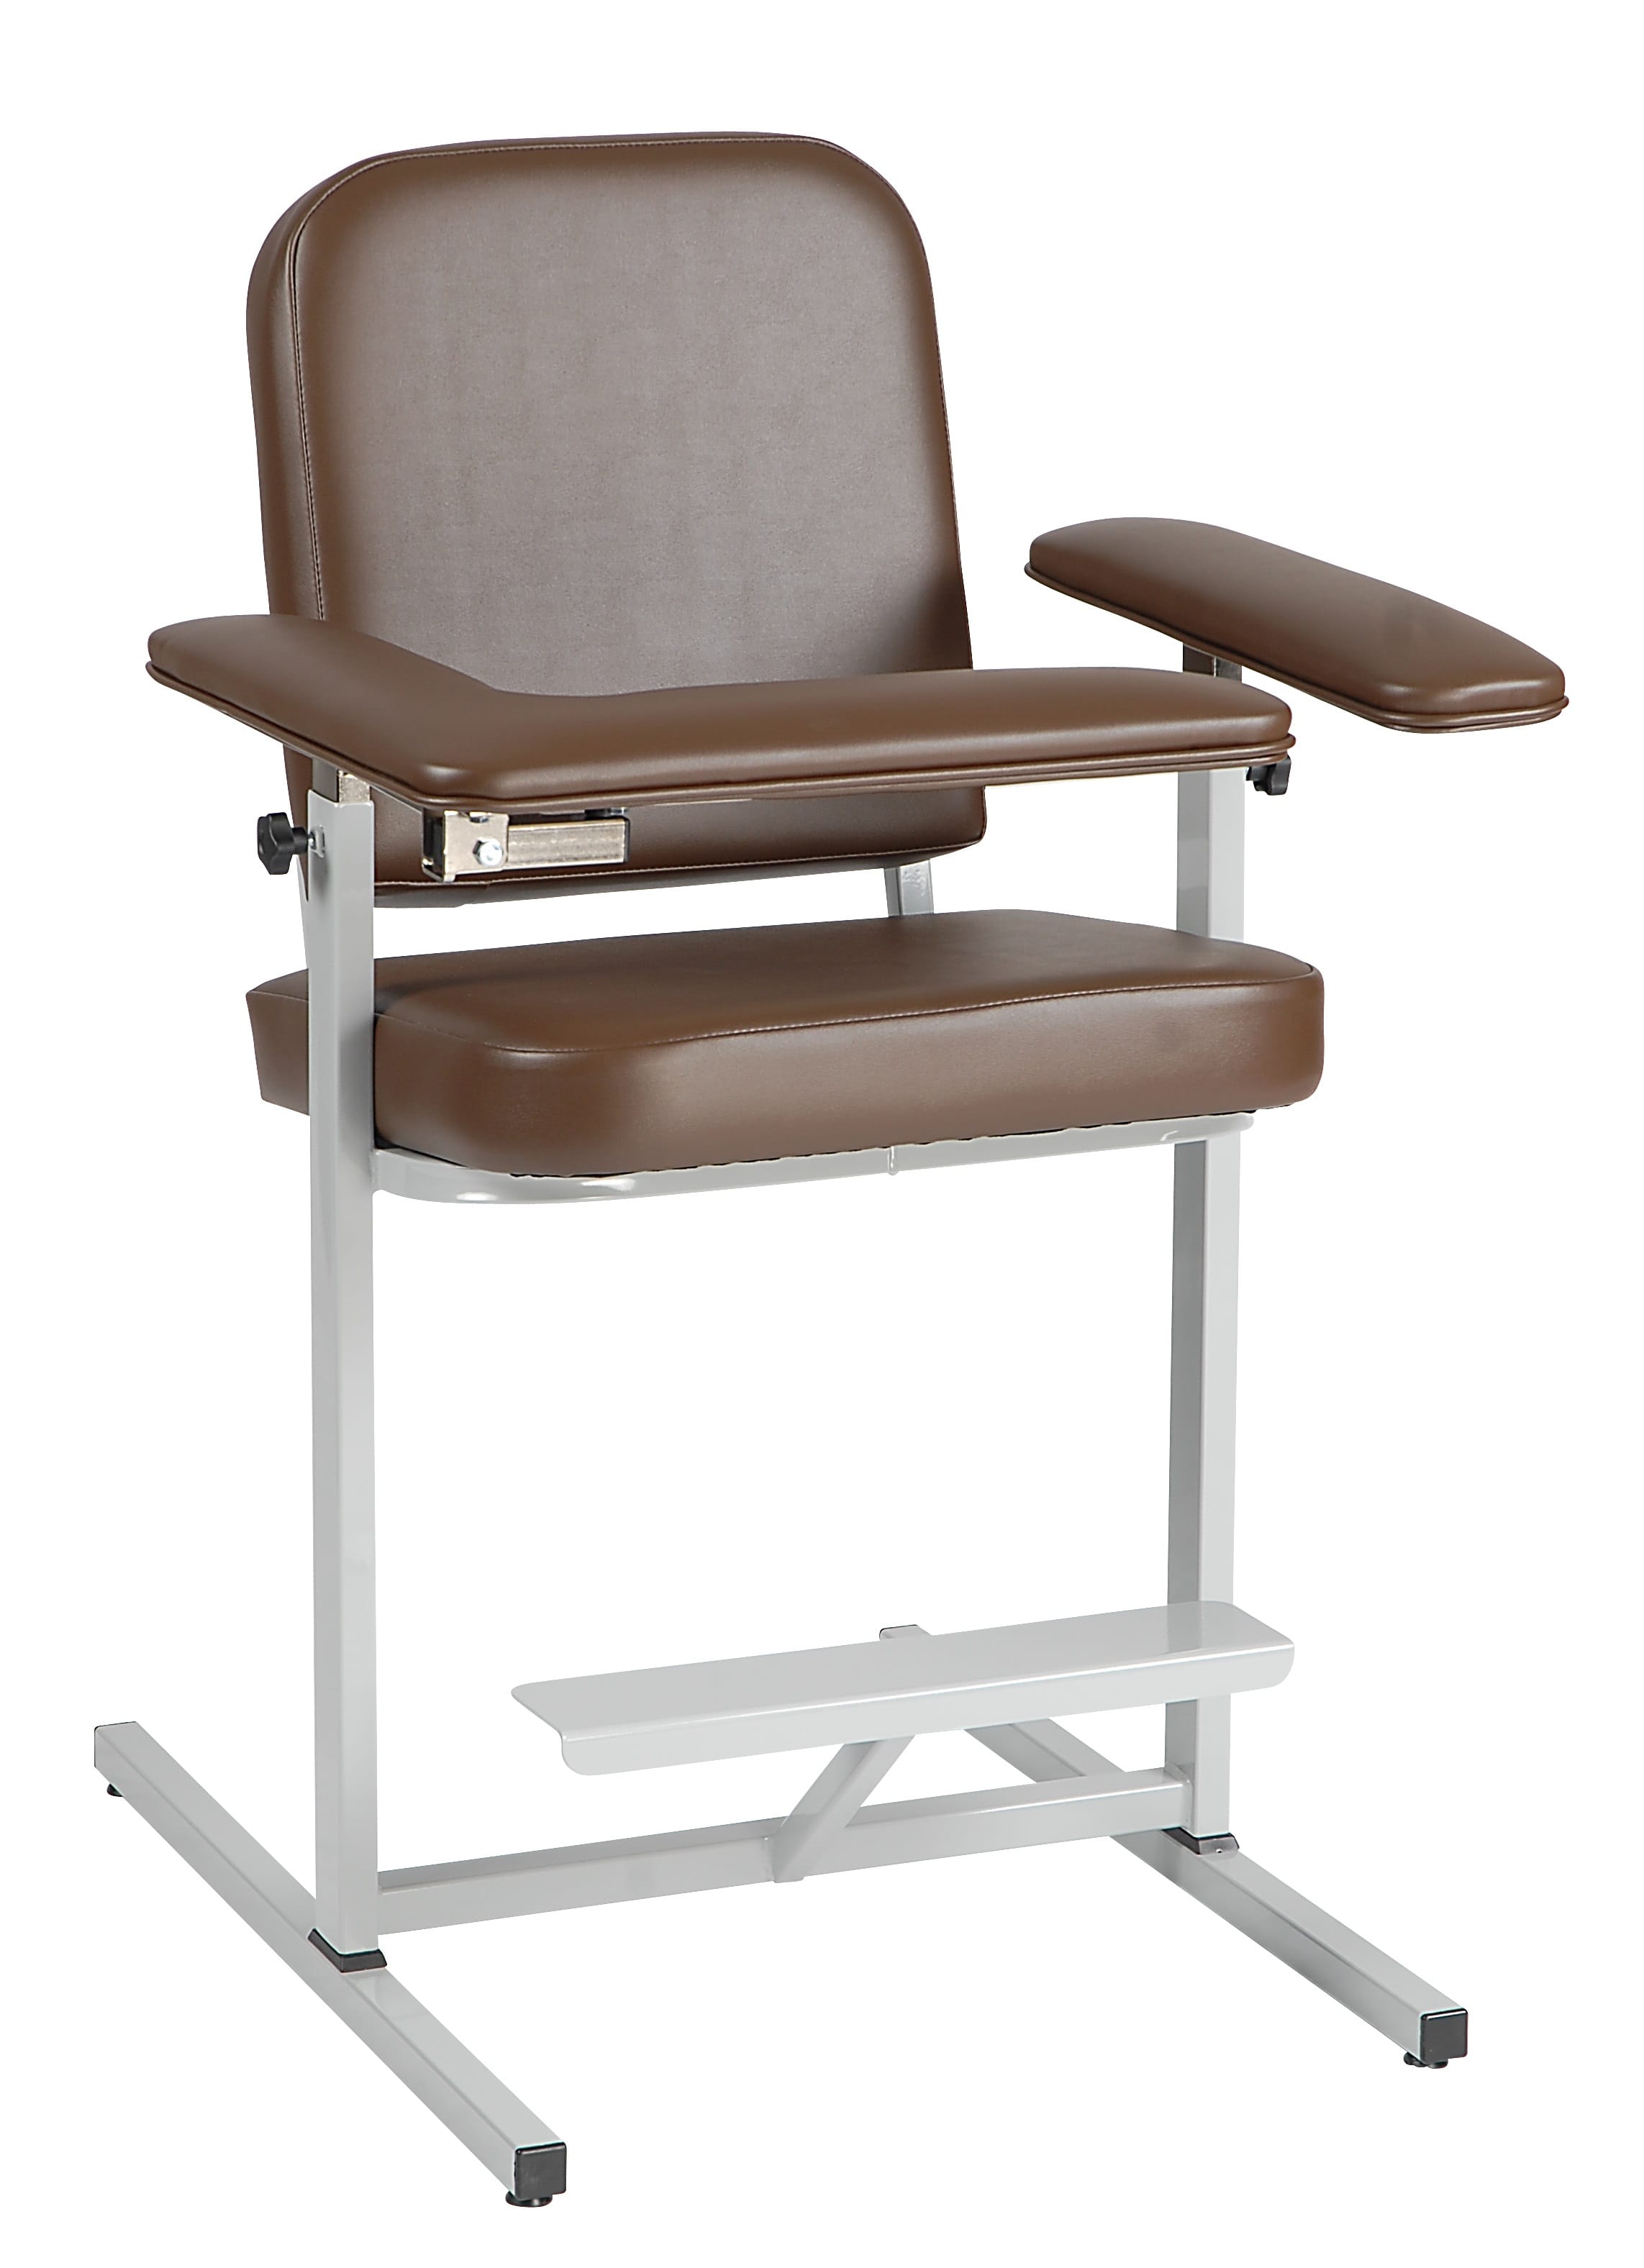 Fully Upholstered Narrow Tall Height Space Saving Blood Draw Chair with Footrest